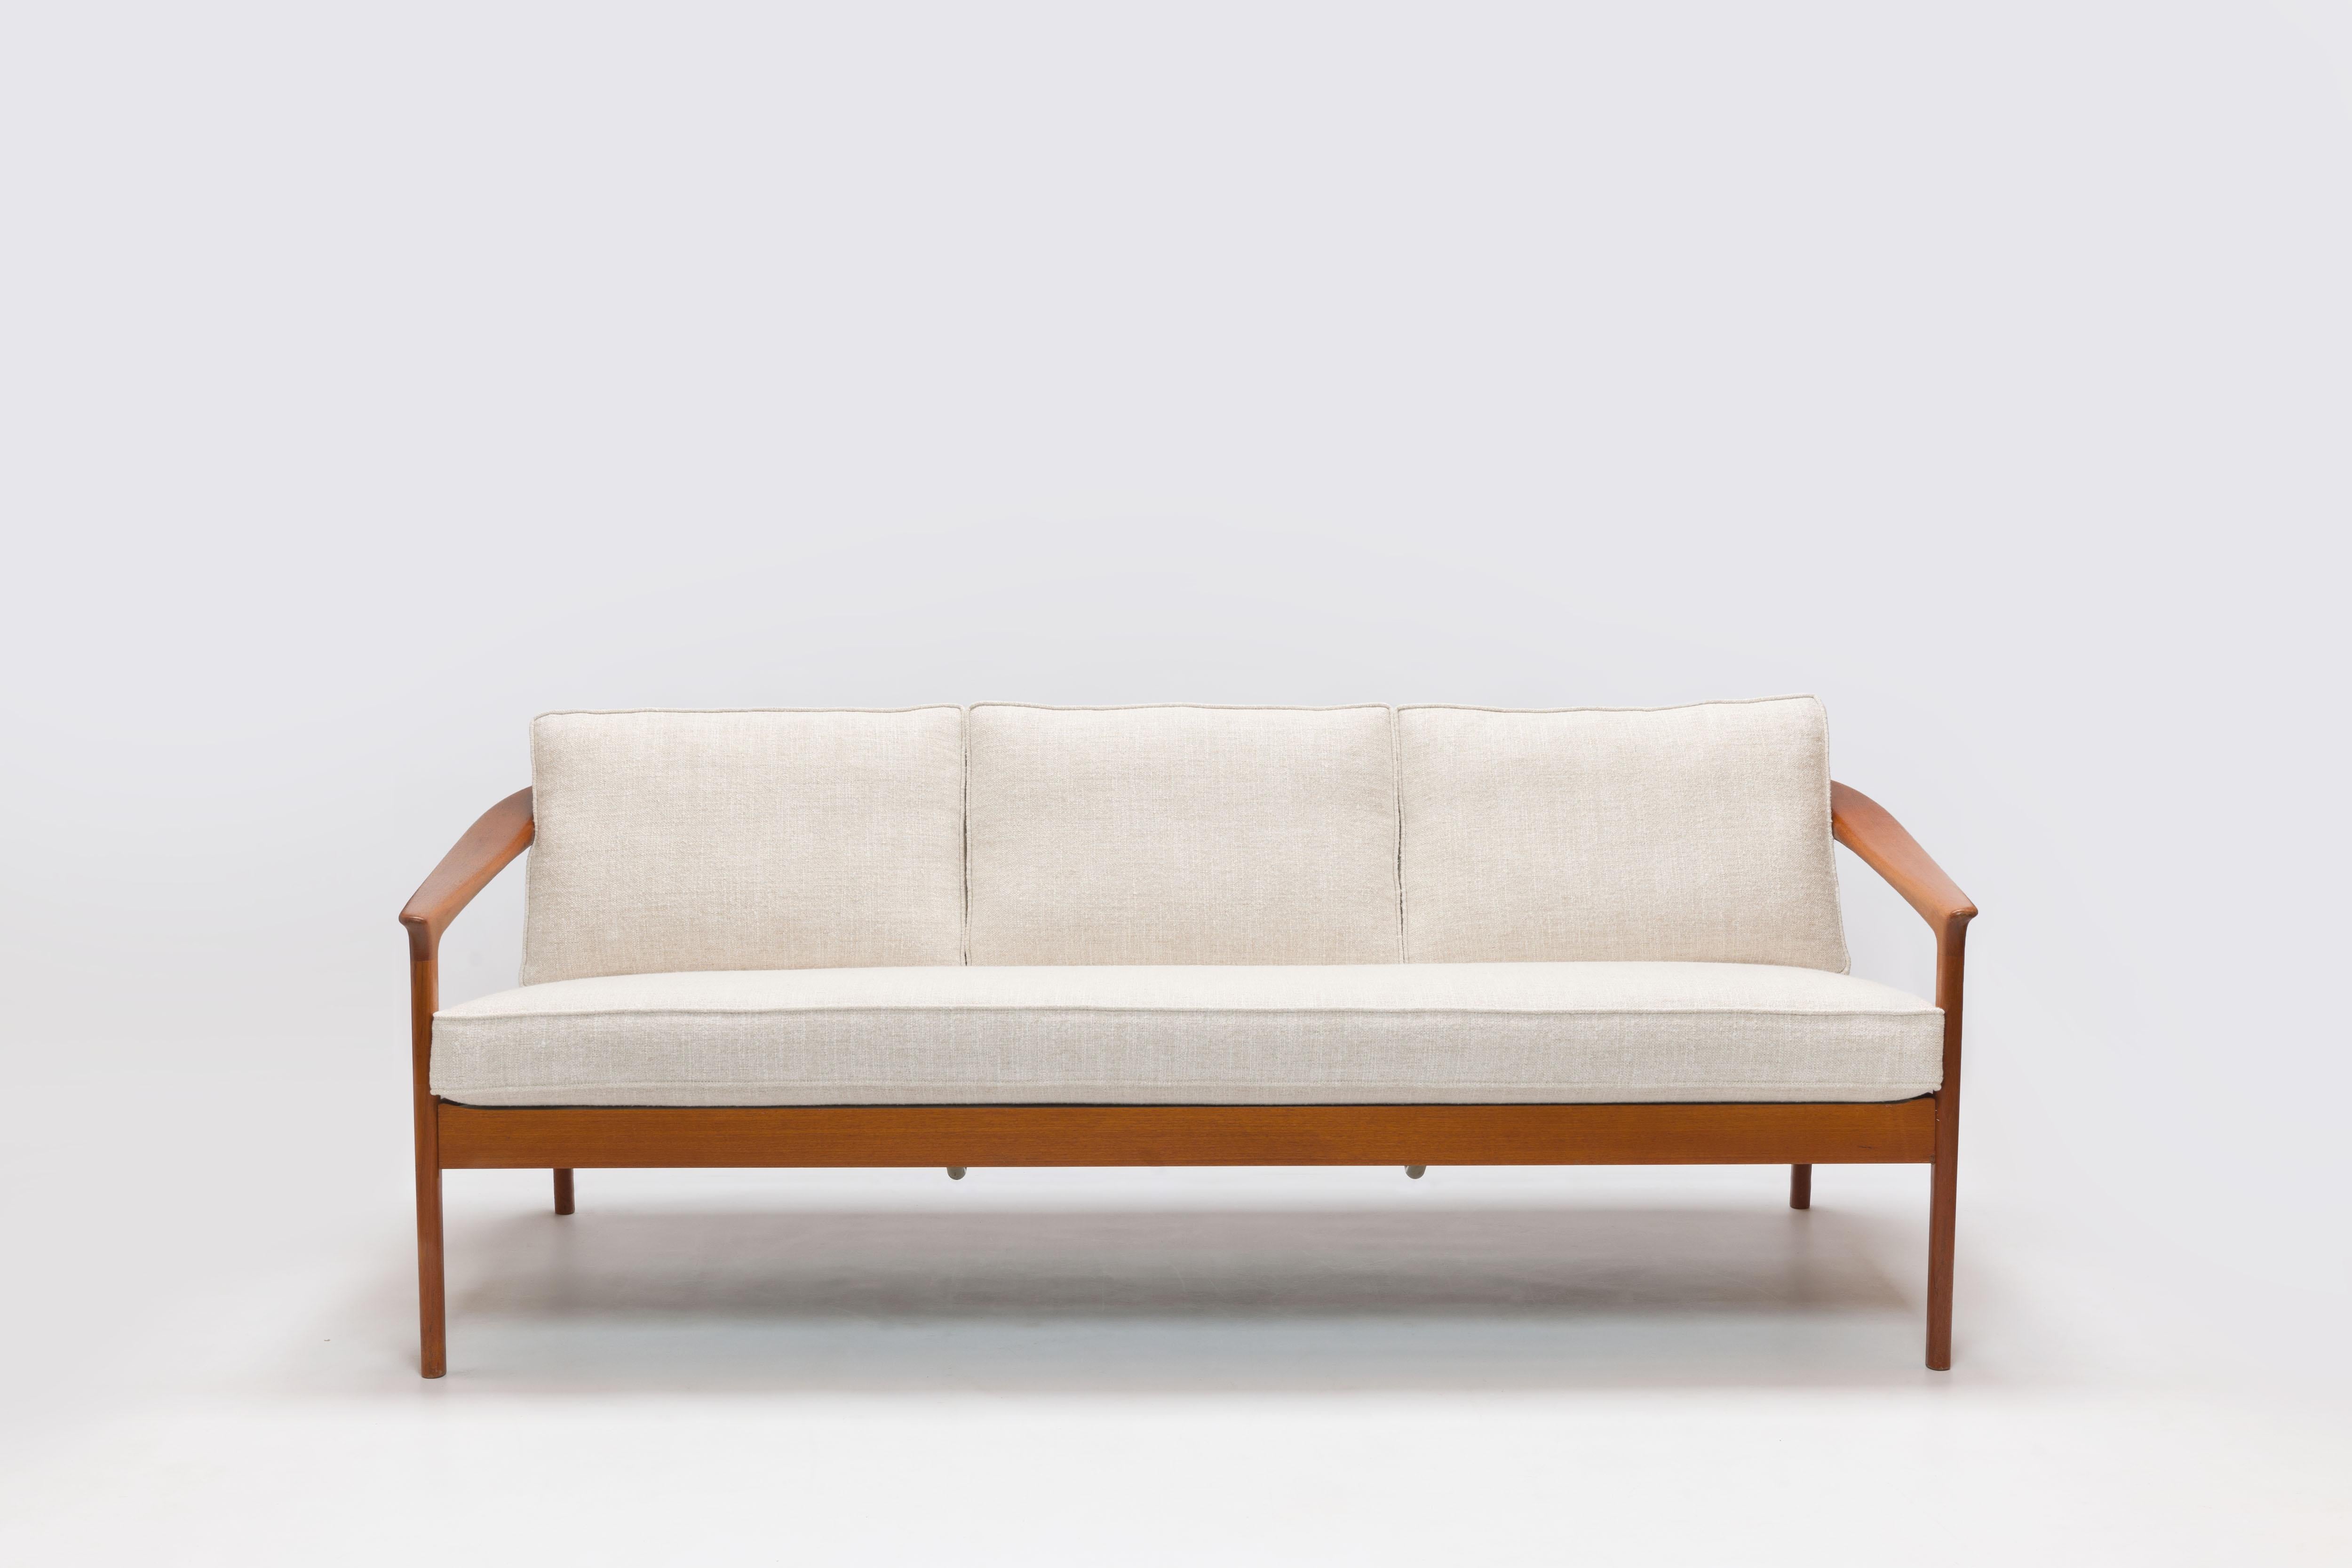 Exceptionally refined 3-seat sofa by Swedish designer Folke Ohlsson for Bodafors Sweden in all new neutral Pierre Frey (high end fabric) upholstery with all new cushions.
This sofa design from 1962 is celebrated for its refined lines and